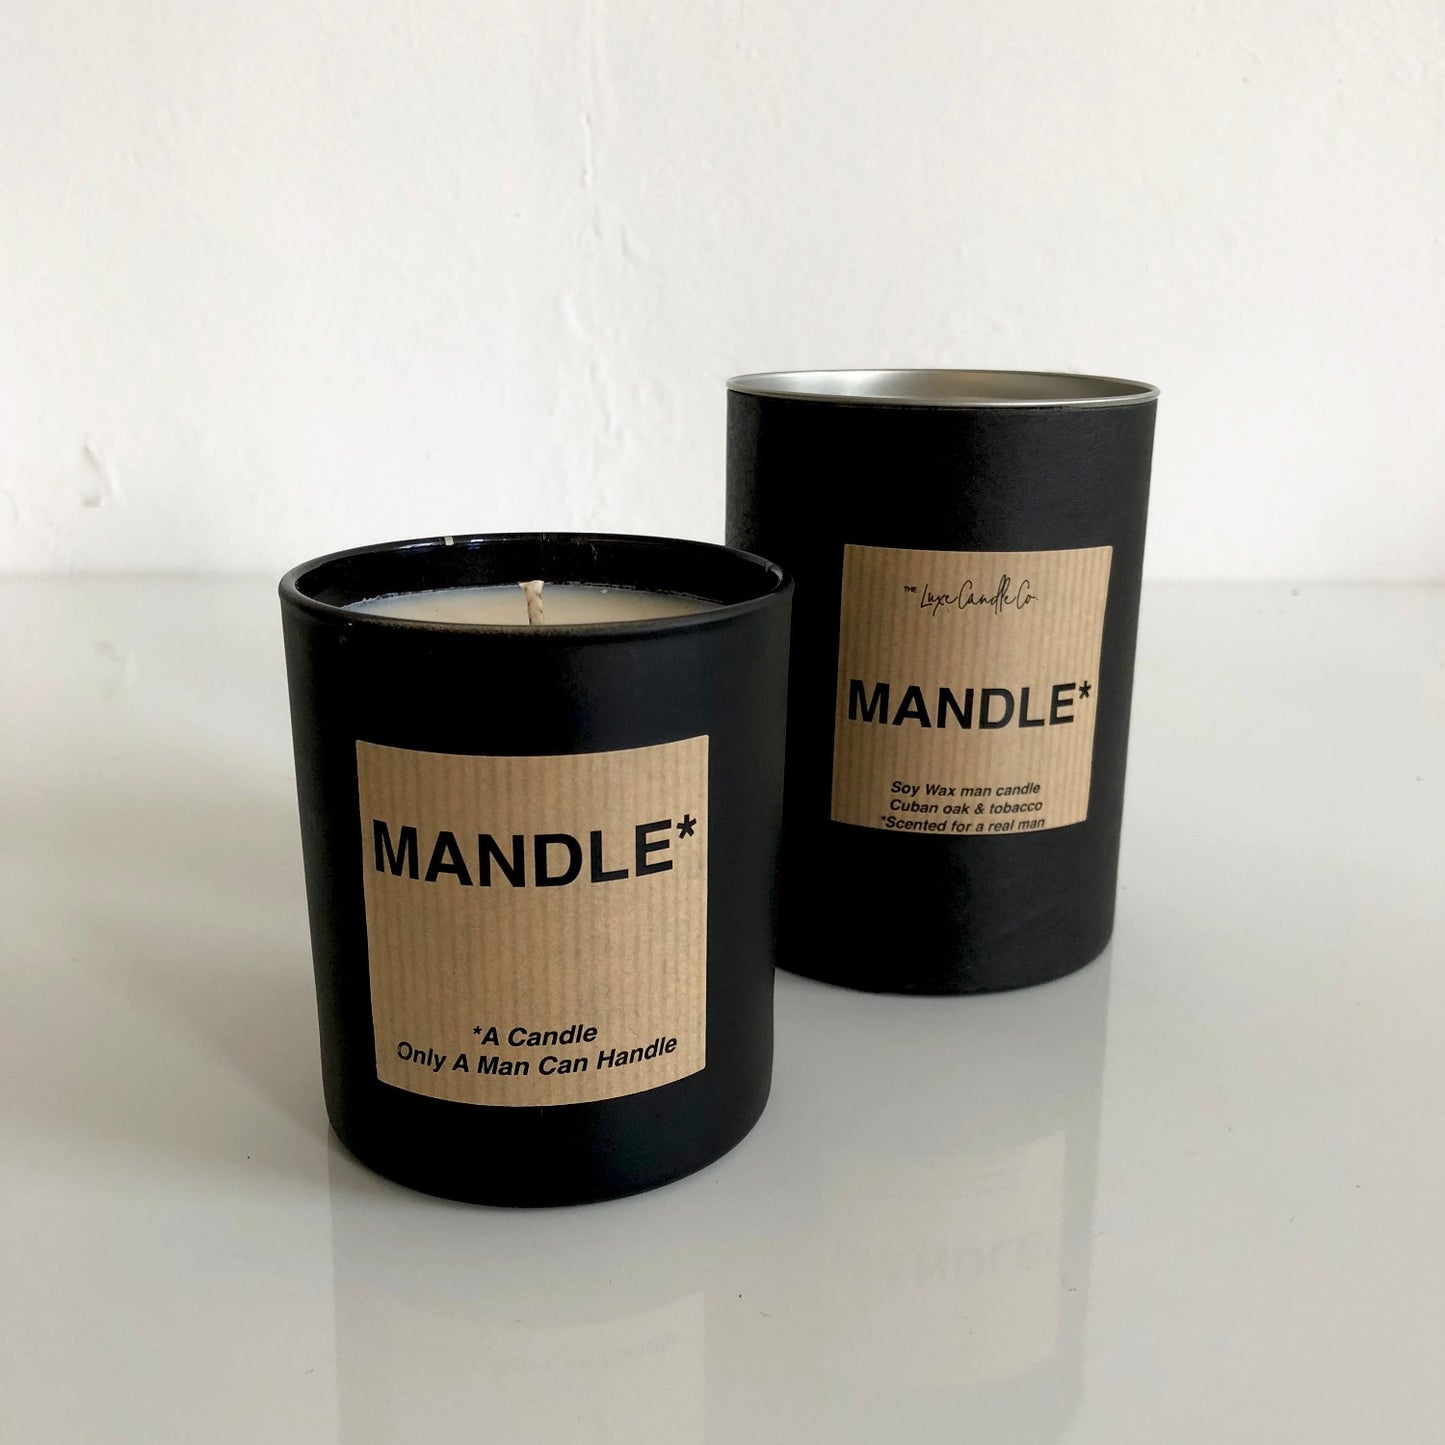 Mens gift idea valentines day - The Mandle a man candle